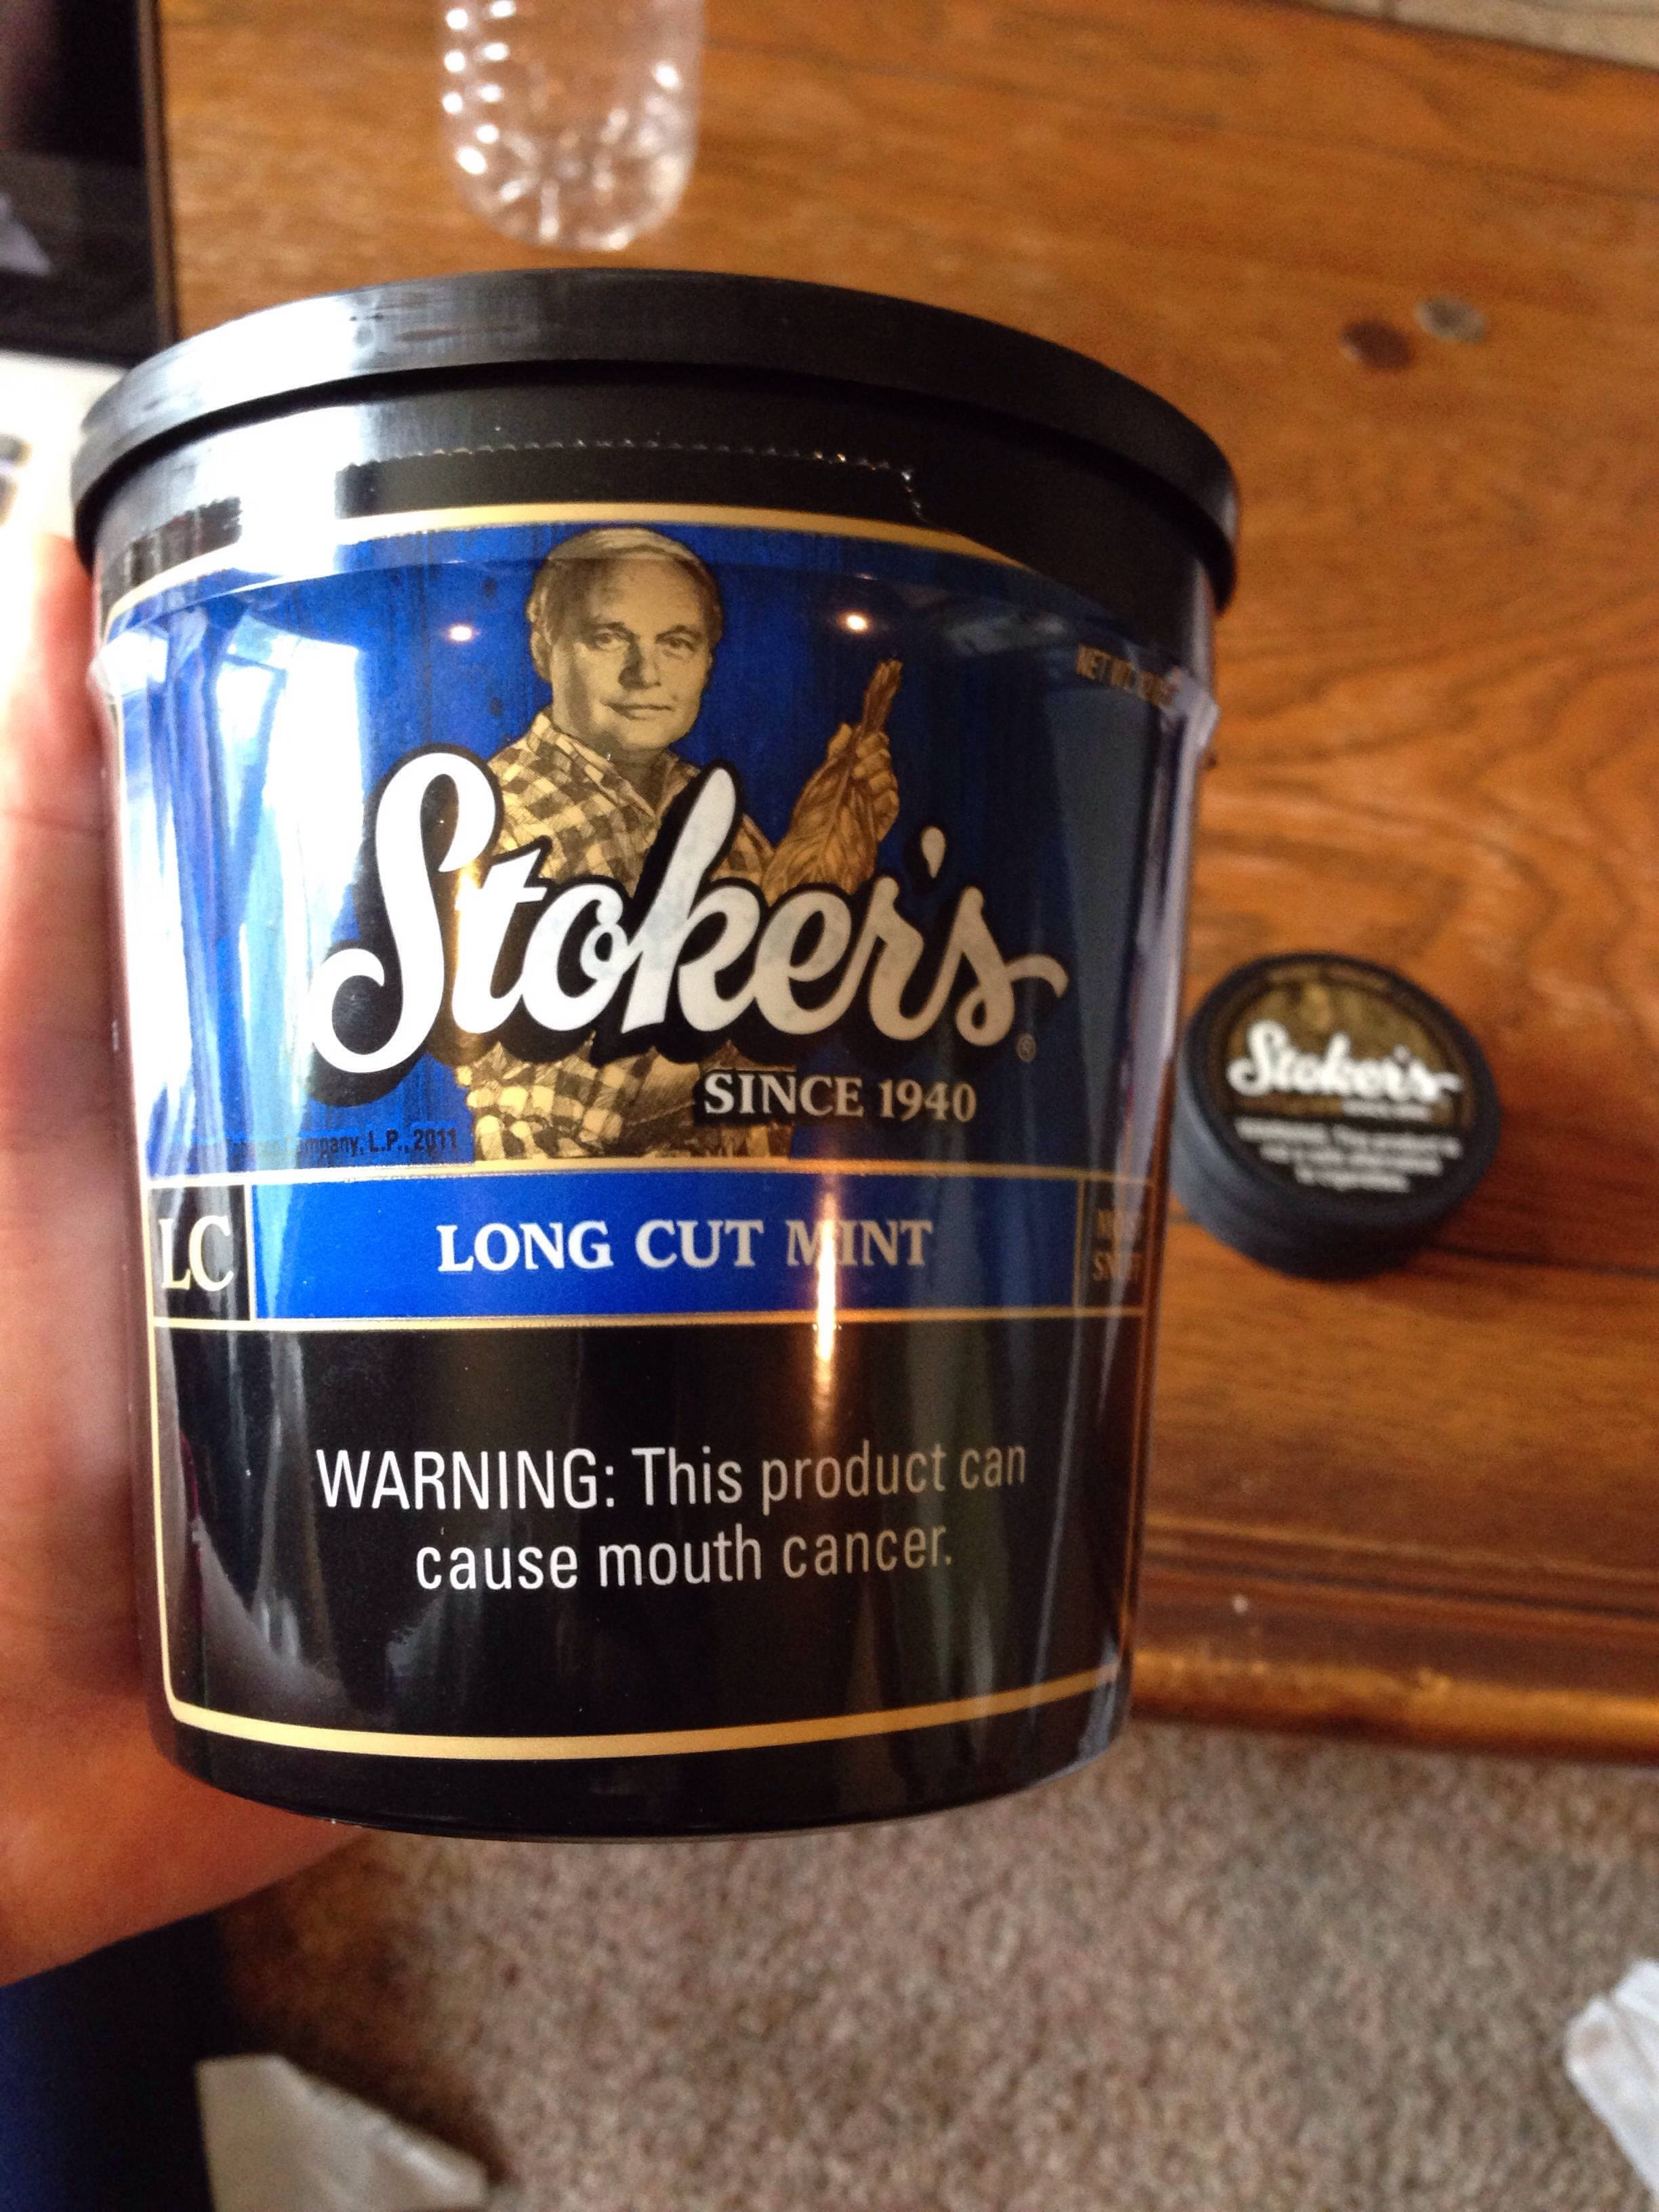 stokers